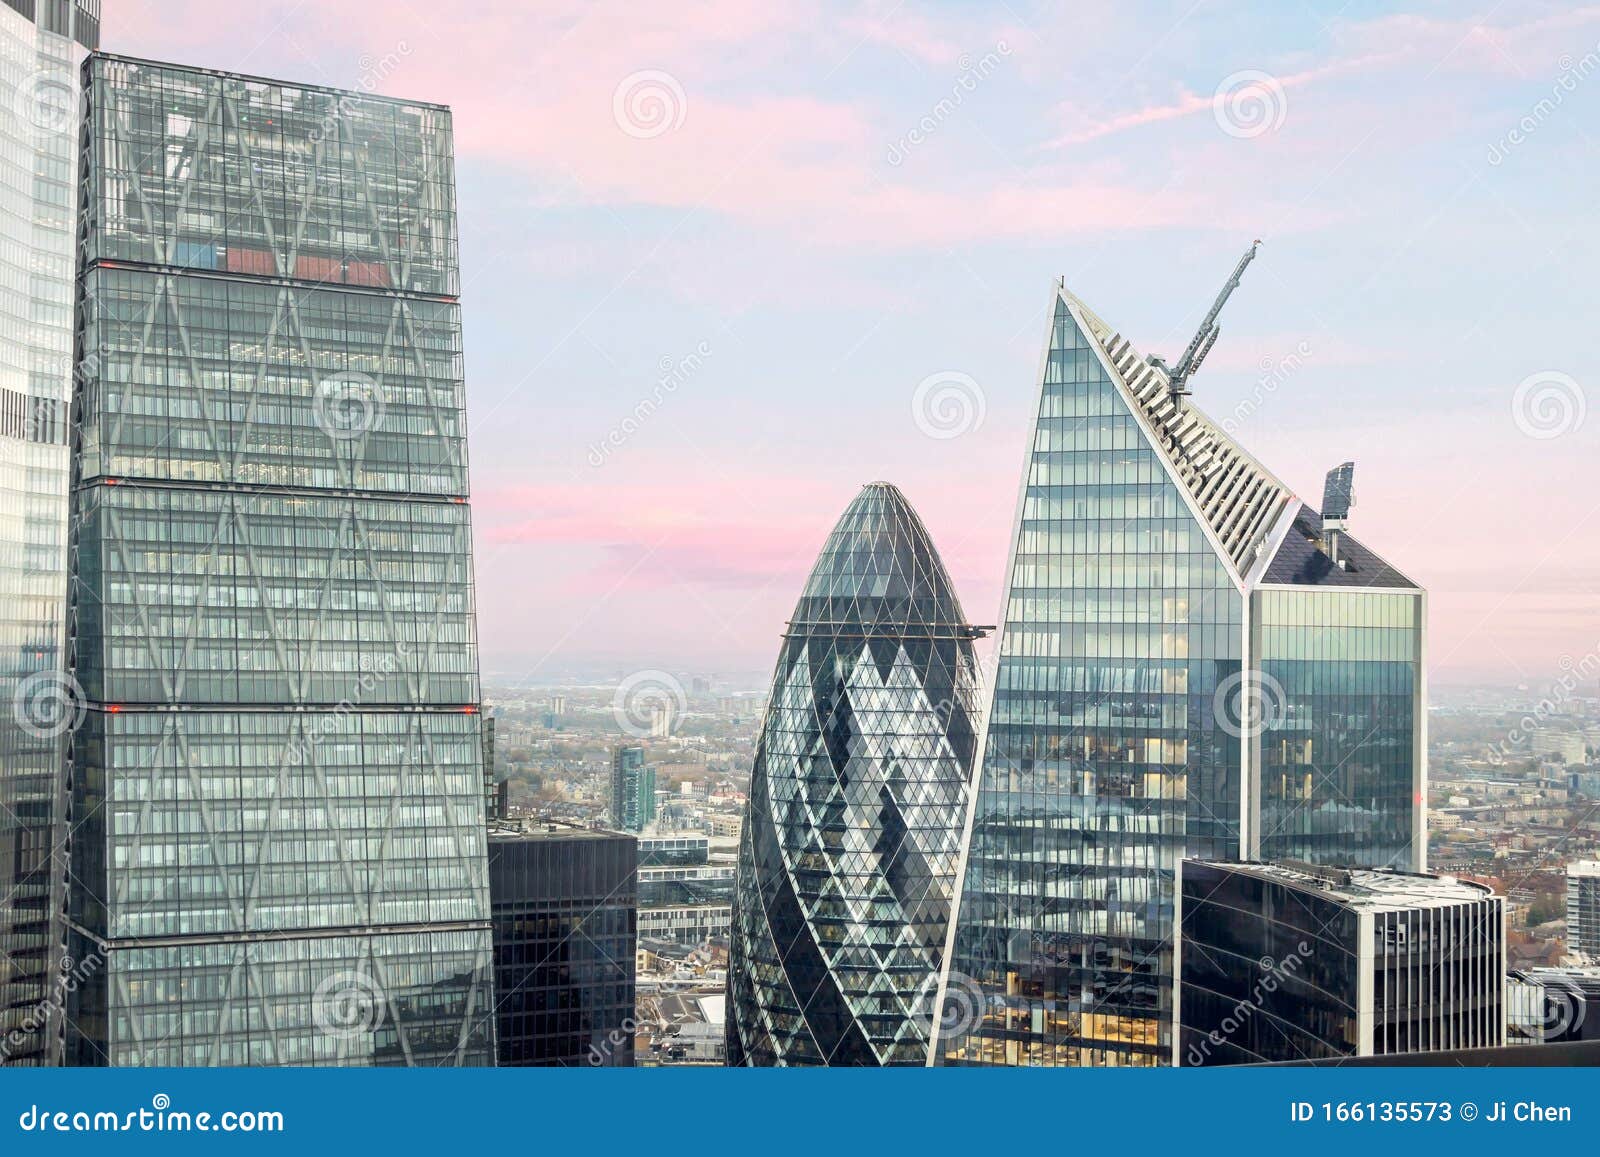 Cityscape Of Gherkin Building With Blue Sky At Central London Editorial